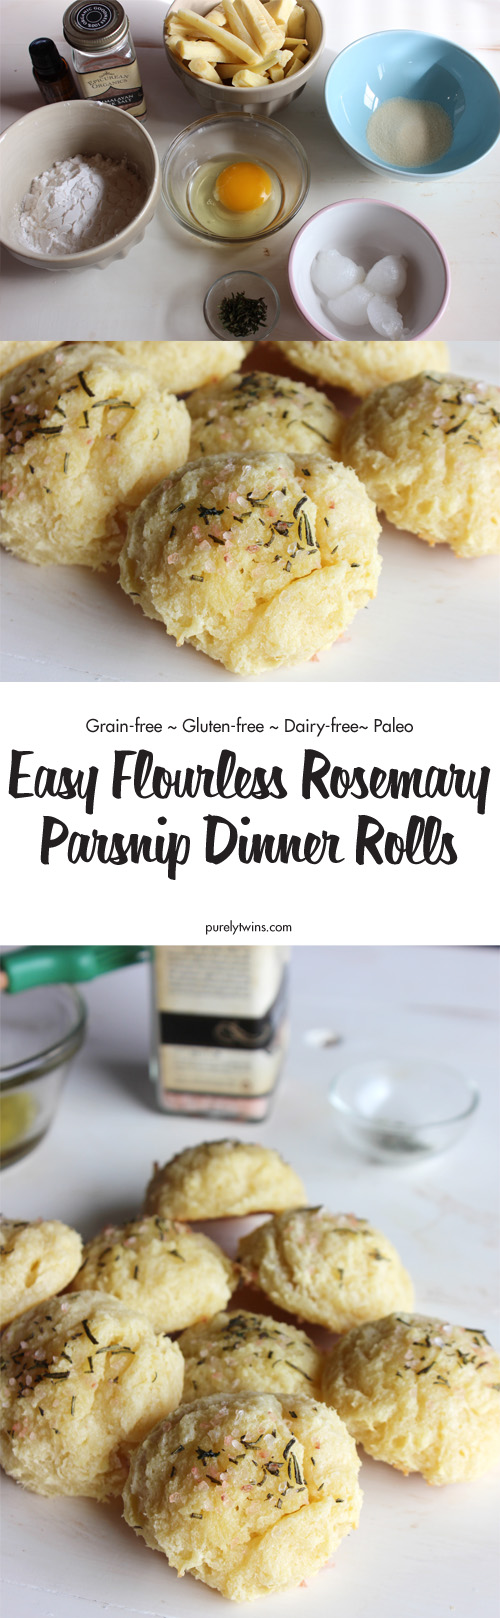 Easy gluten-free rosemary dinner rolls made from parsnips. The BEST dinner rolls. No flour. No yeast. Paleo dinner rolls that are soft, chewy and full of flavor. No need to buy store bought dinner rolls when you have parsnip rolls. If you like rosemary and parsnips this is the roll for you.